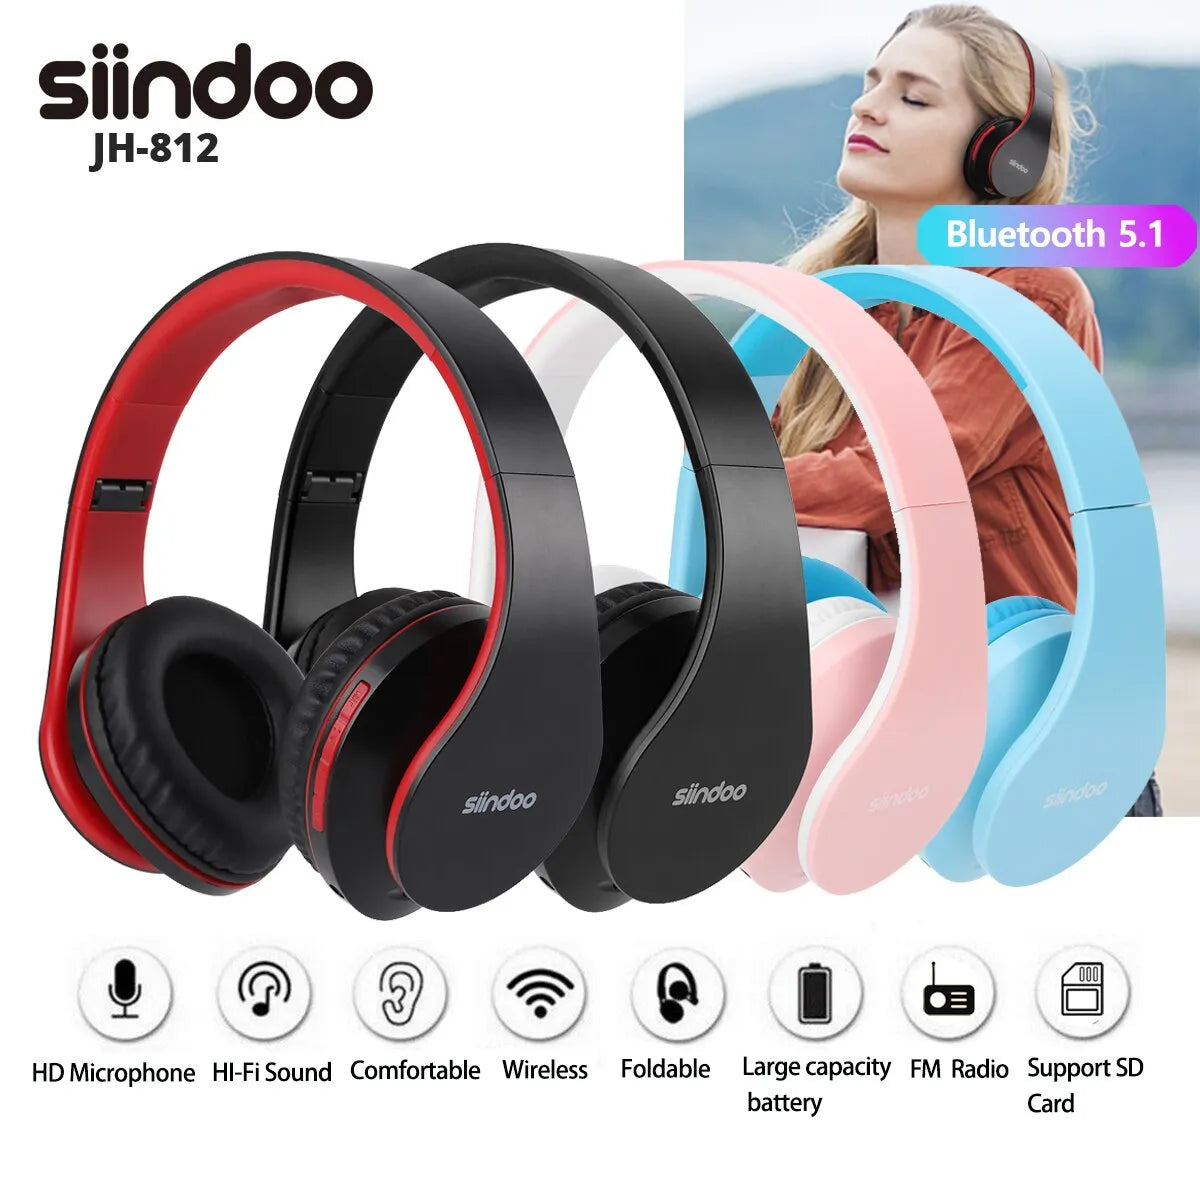 Siindoo JH-812 Wireless Headphone Foldable Stereo BT5.1 Earphones Music Headset FM and Support SD Card with Mic for Mobile PC TV